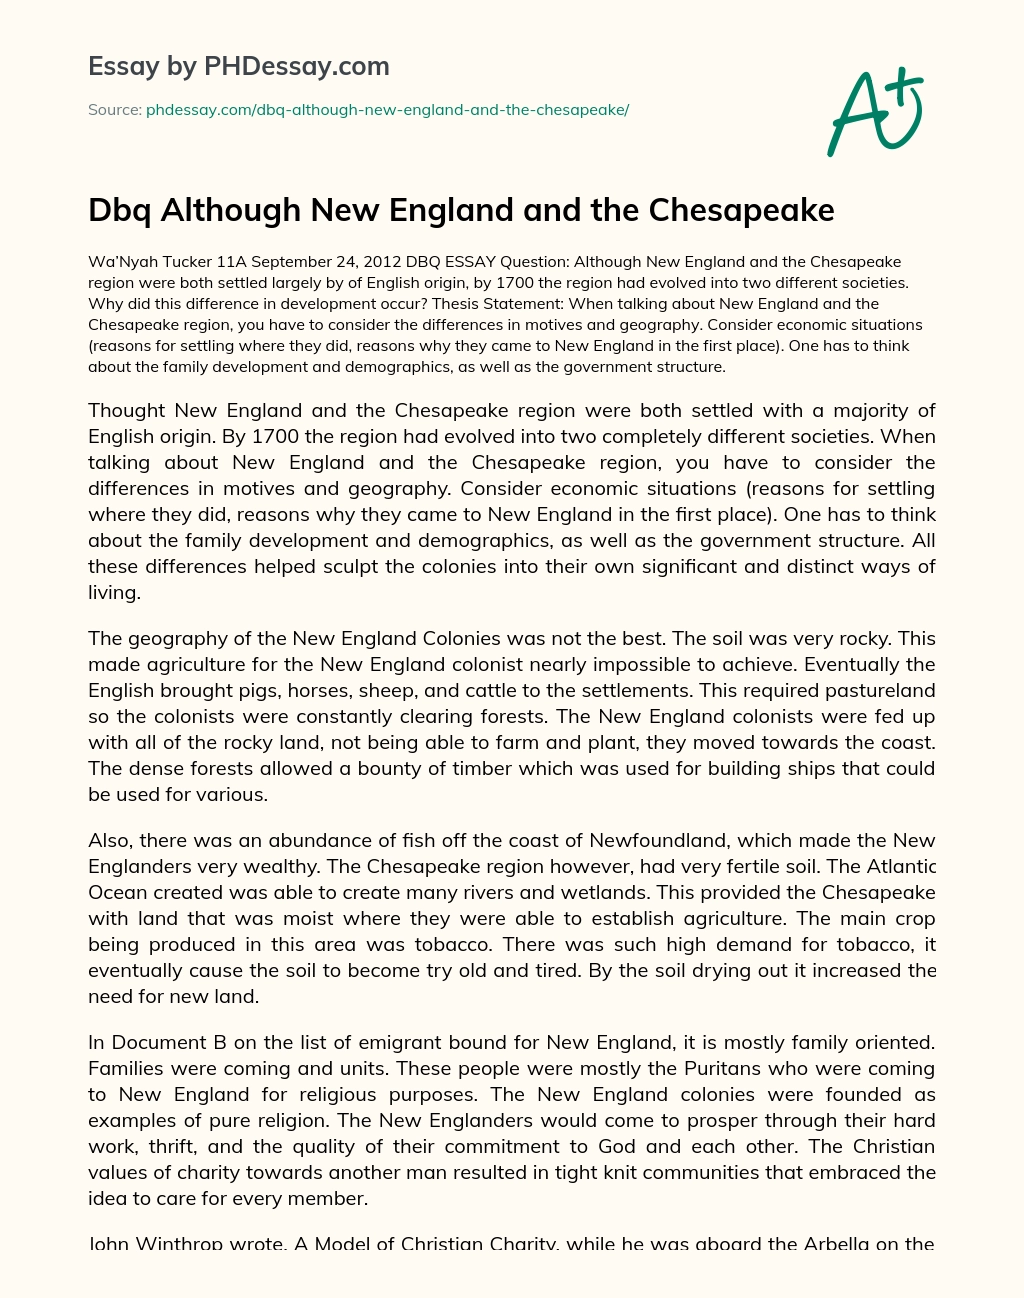 Dbq Although New England and the Chesapeake essay